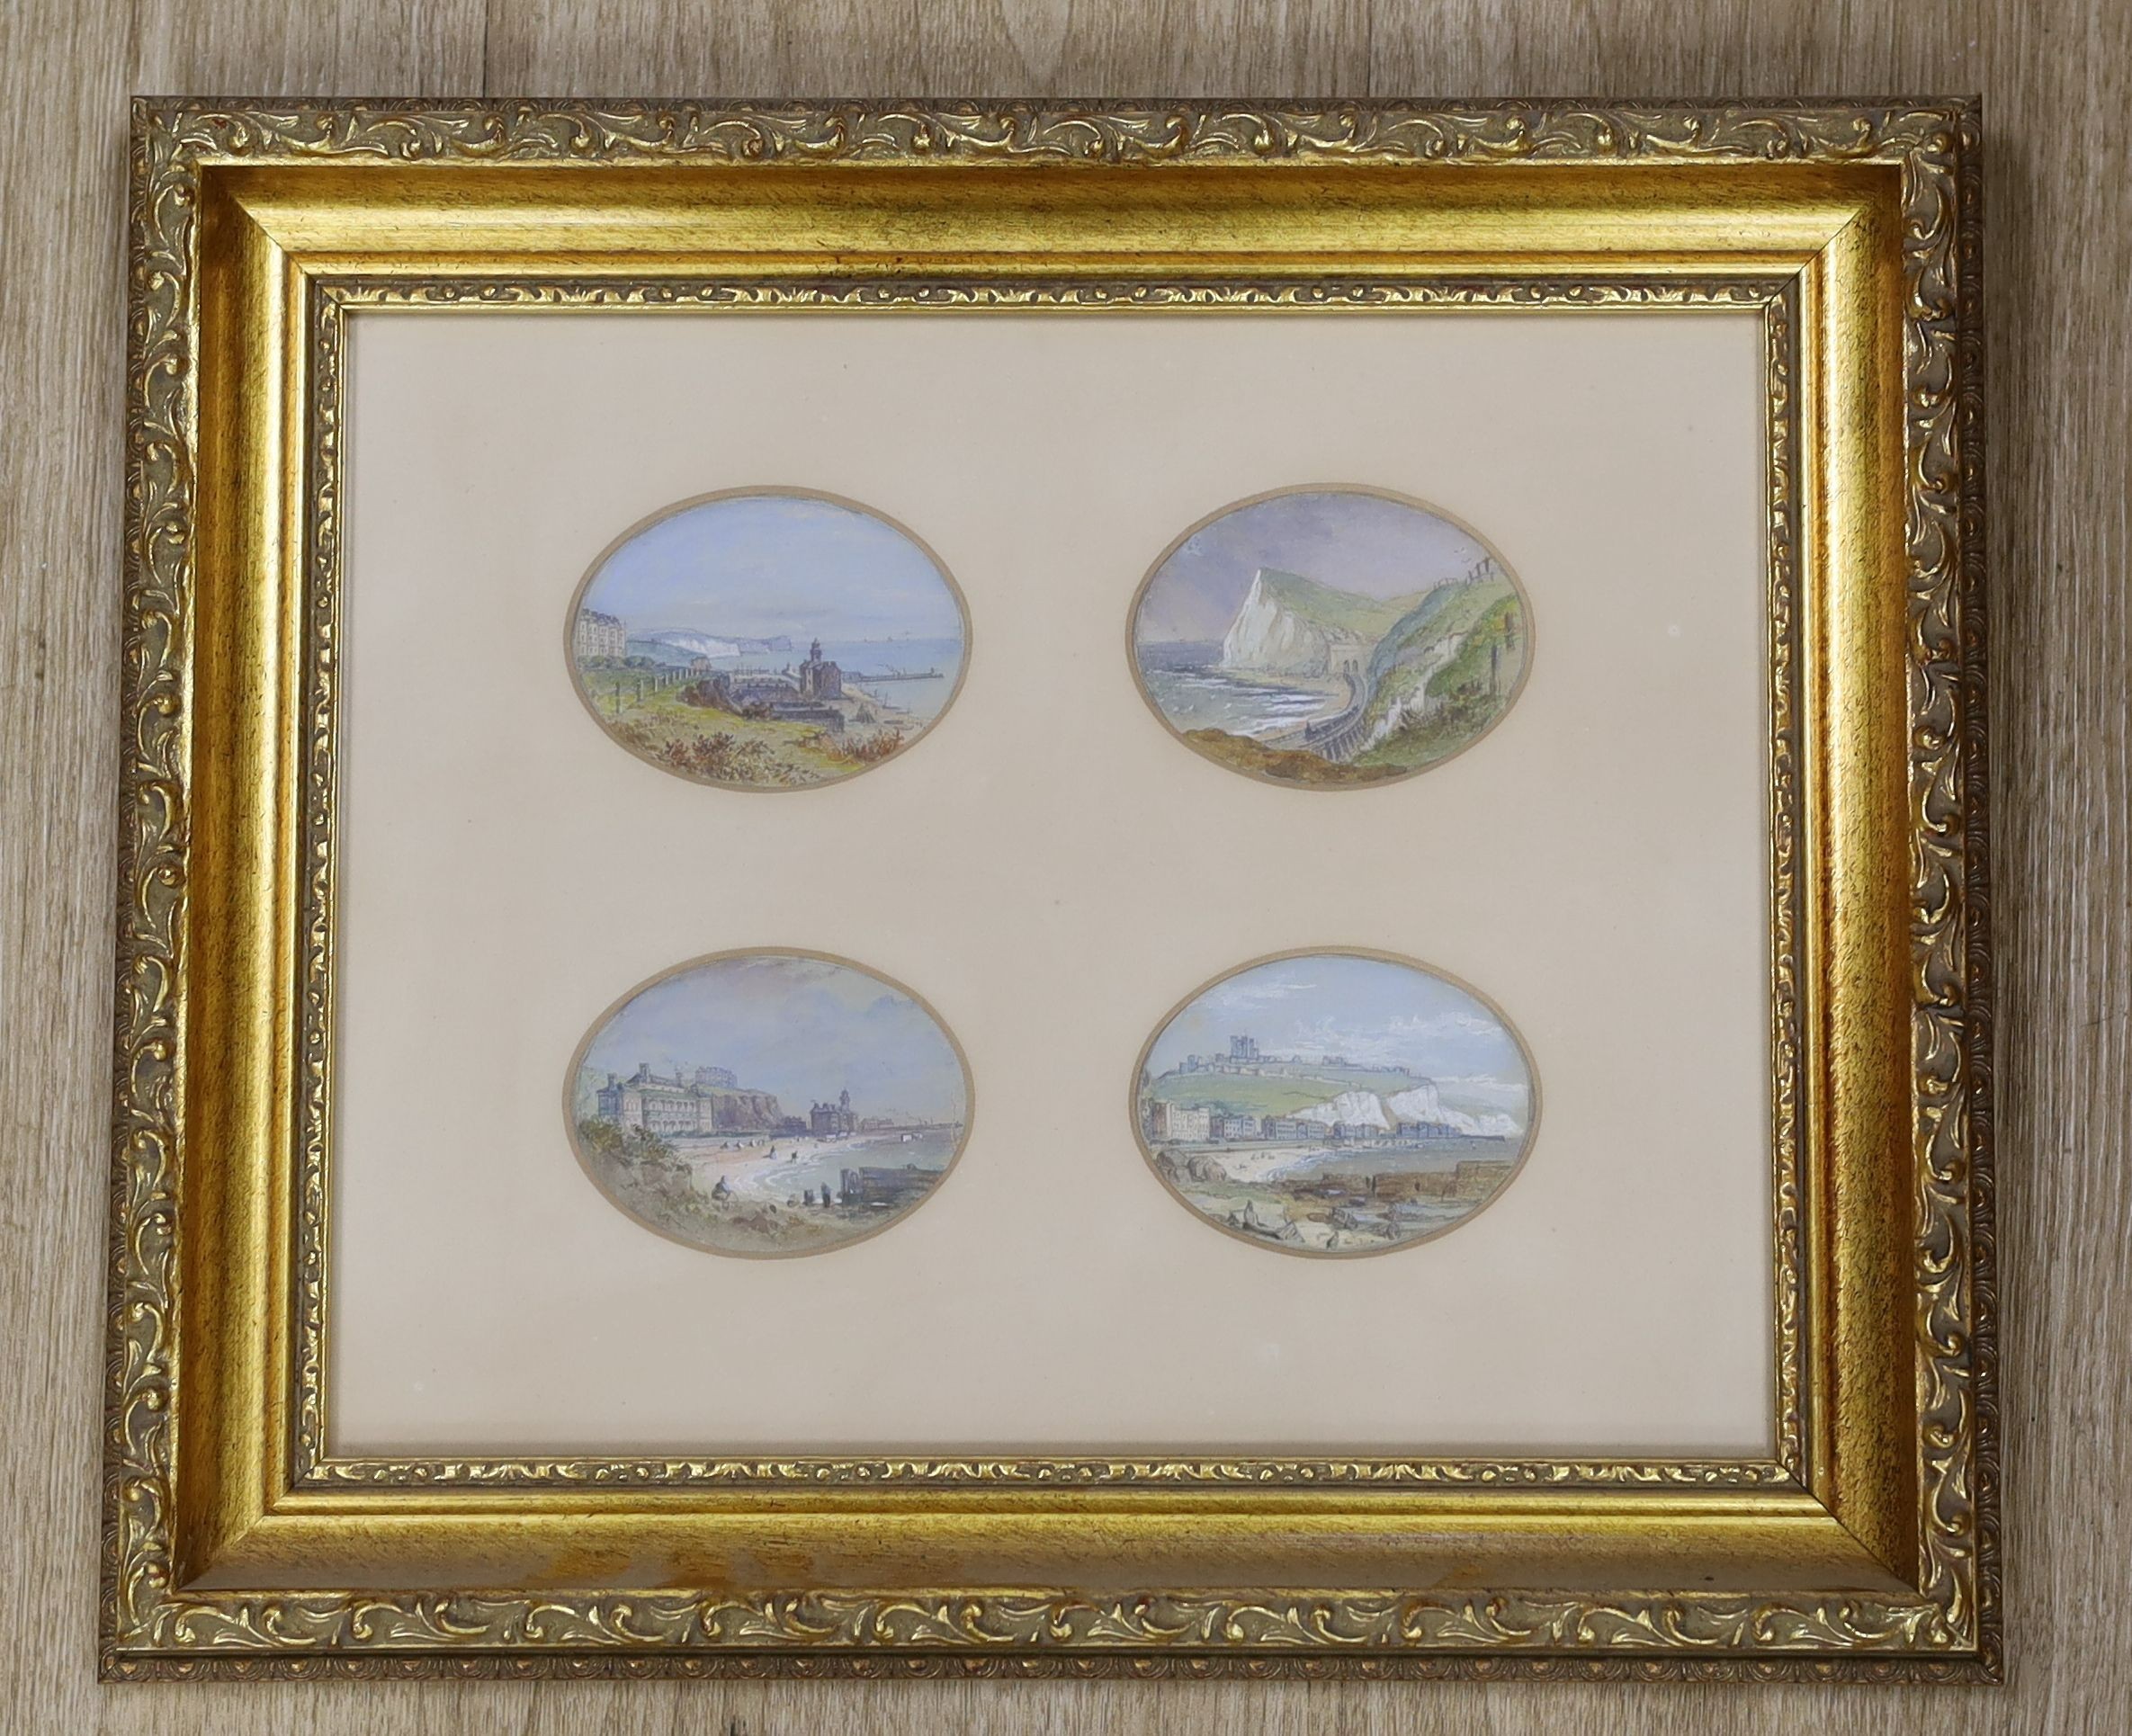 English school c.1880, bodycolour over pencil, four views of Dover and the coast, each 6 x 8cm